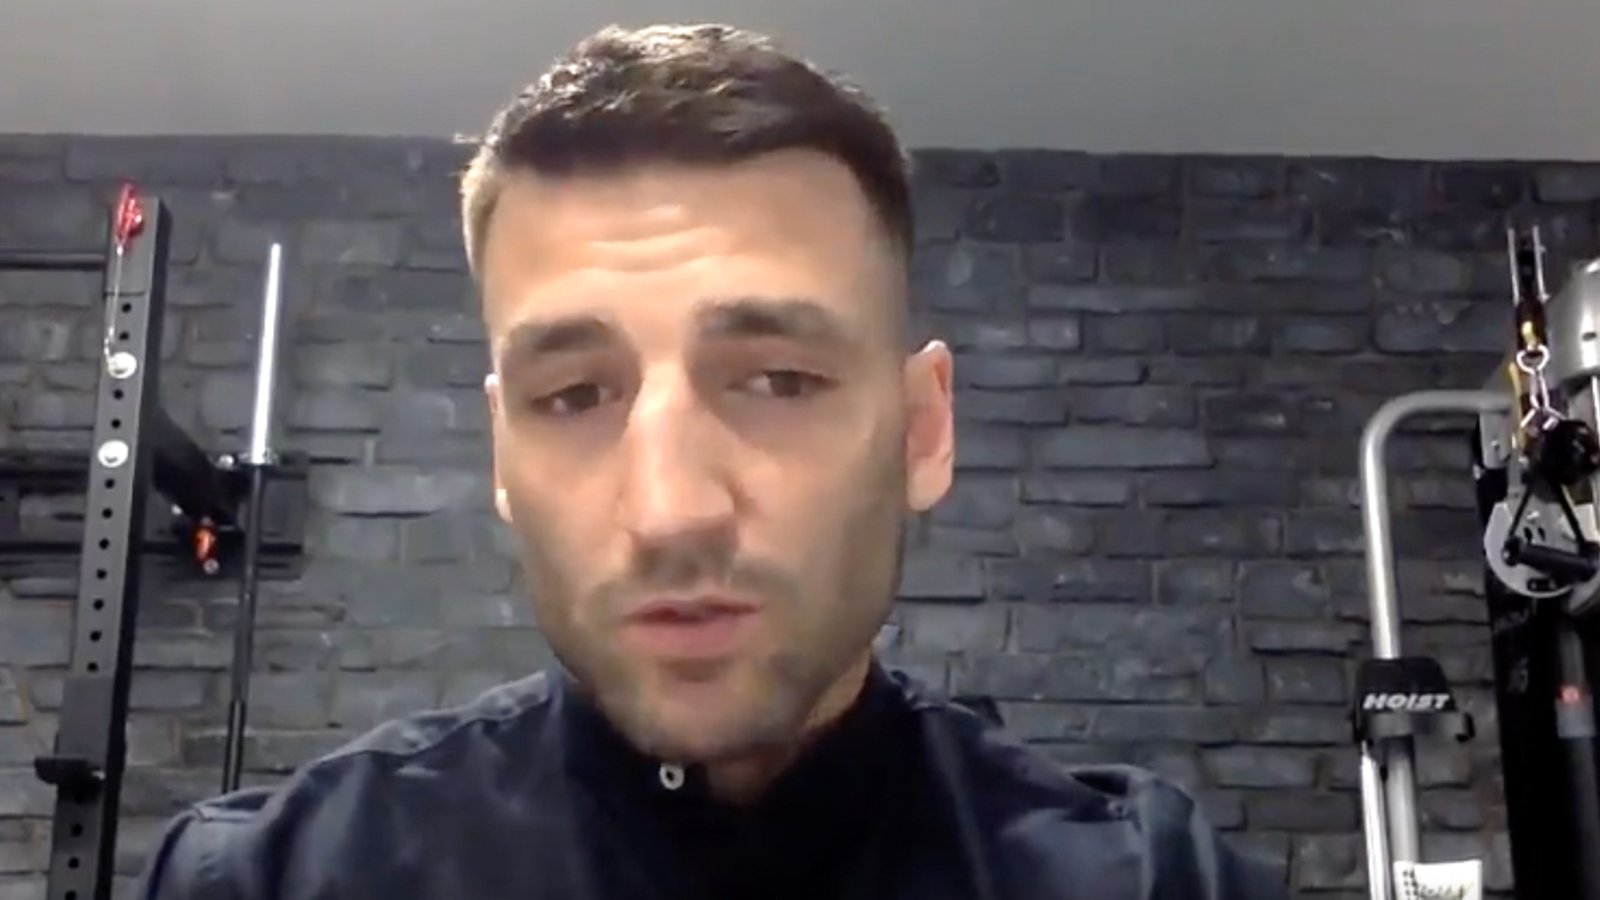 Bergeron refuses to shut up and play as he takes on new initiative despite attacks from trolls 